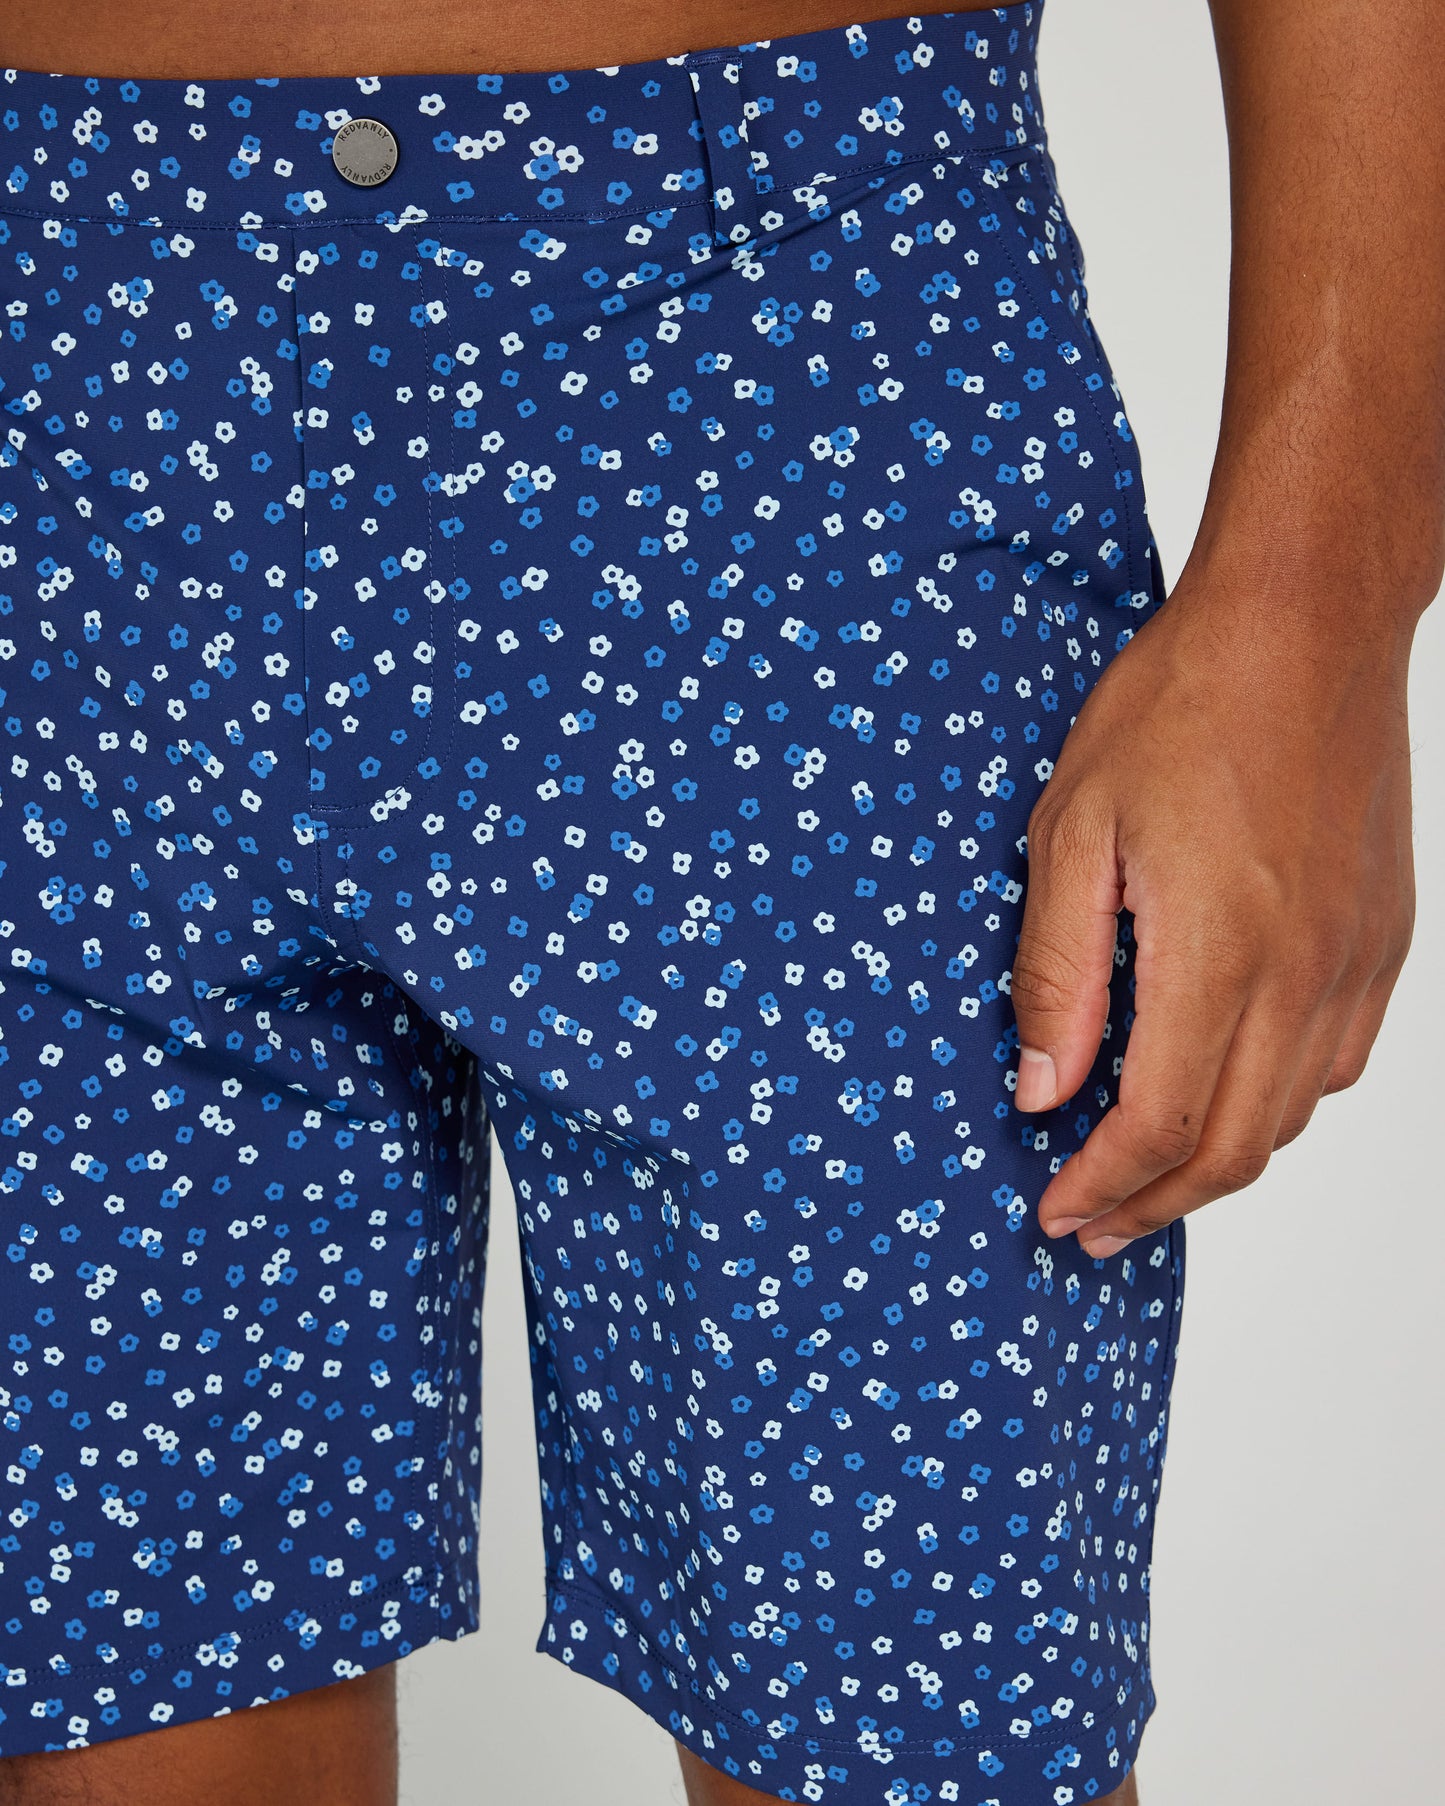 Hanover Mini Floral Pull-On Short in Navy